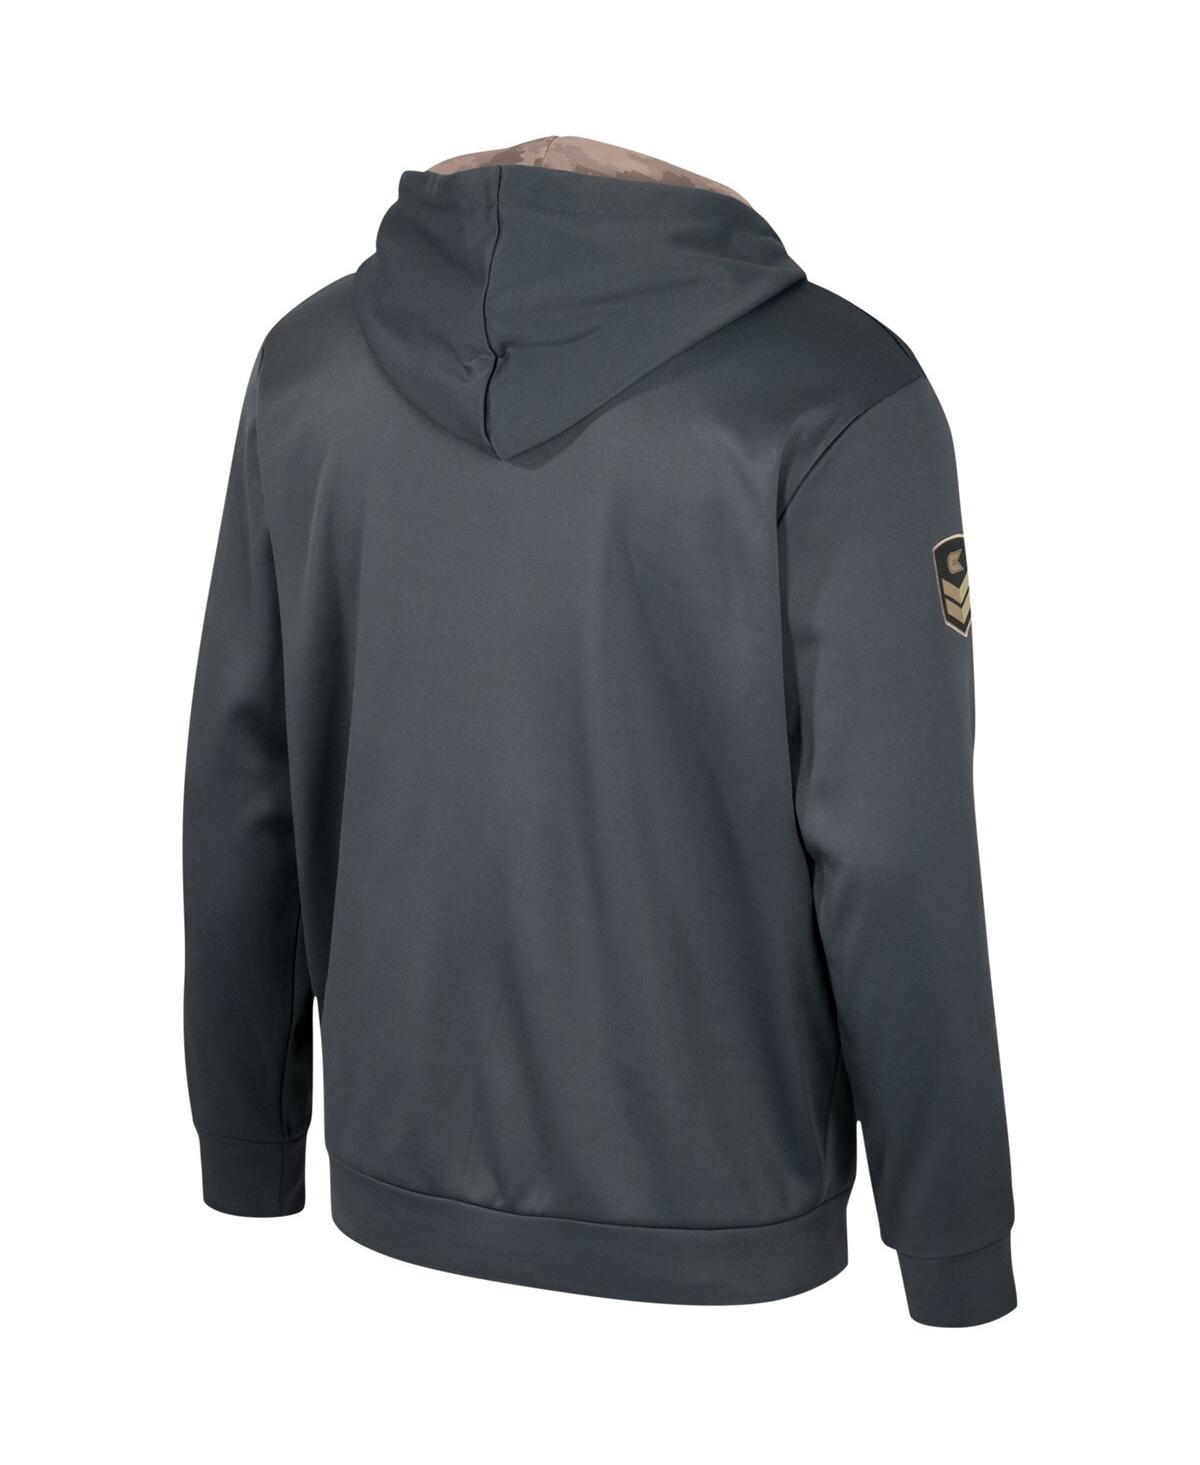 Shop Colosseum Men's  Charcoal Iowa Hawkeyes Oht Military-inspired Appreciation Pullover Hoodie